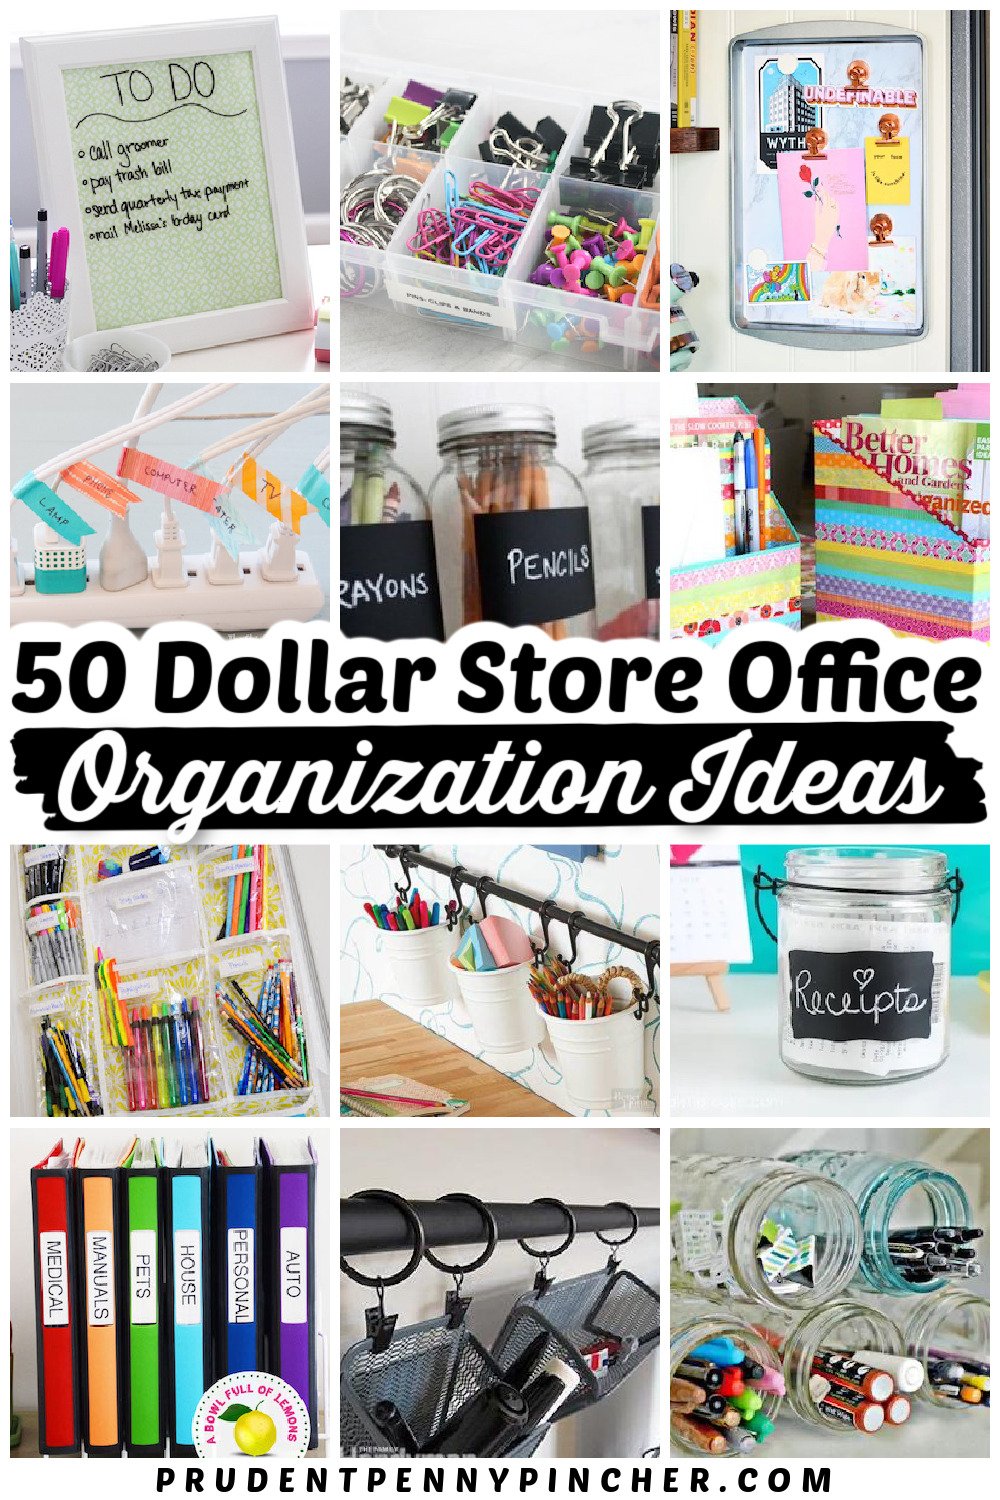 Our Best Office Organizing Ideas